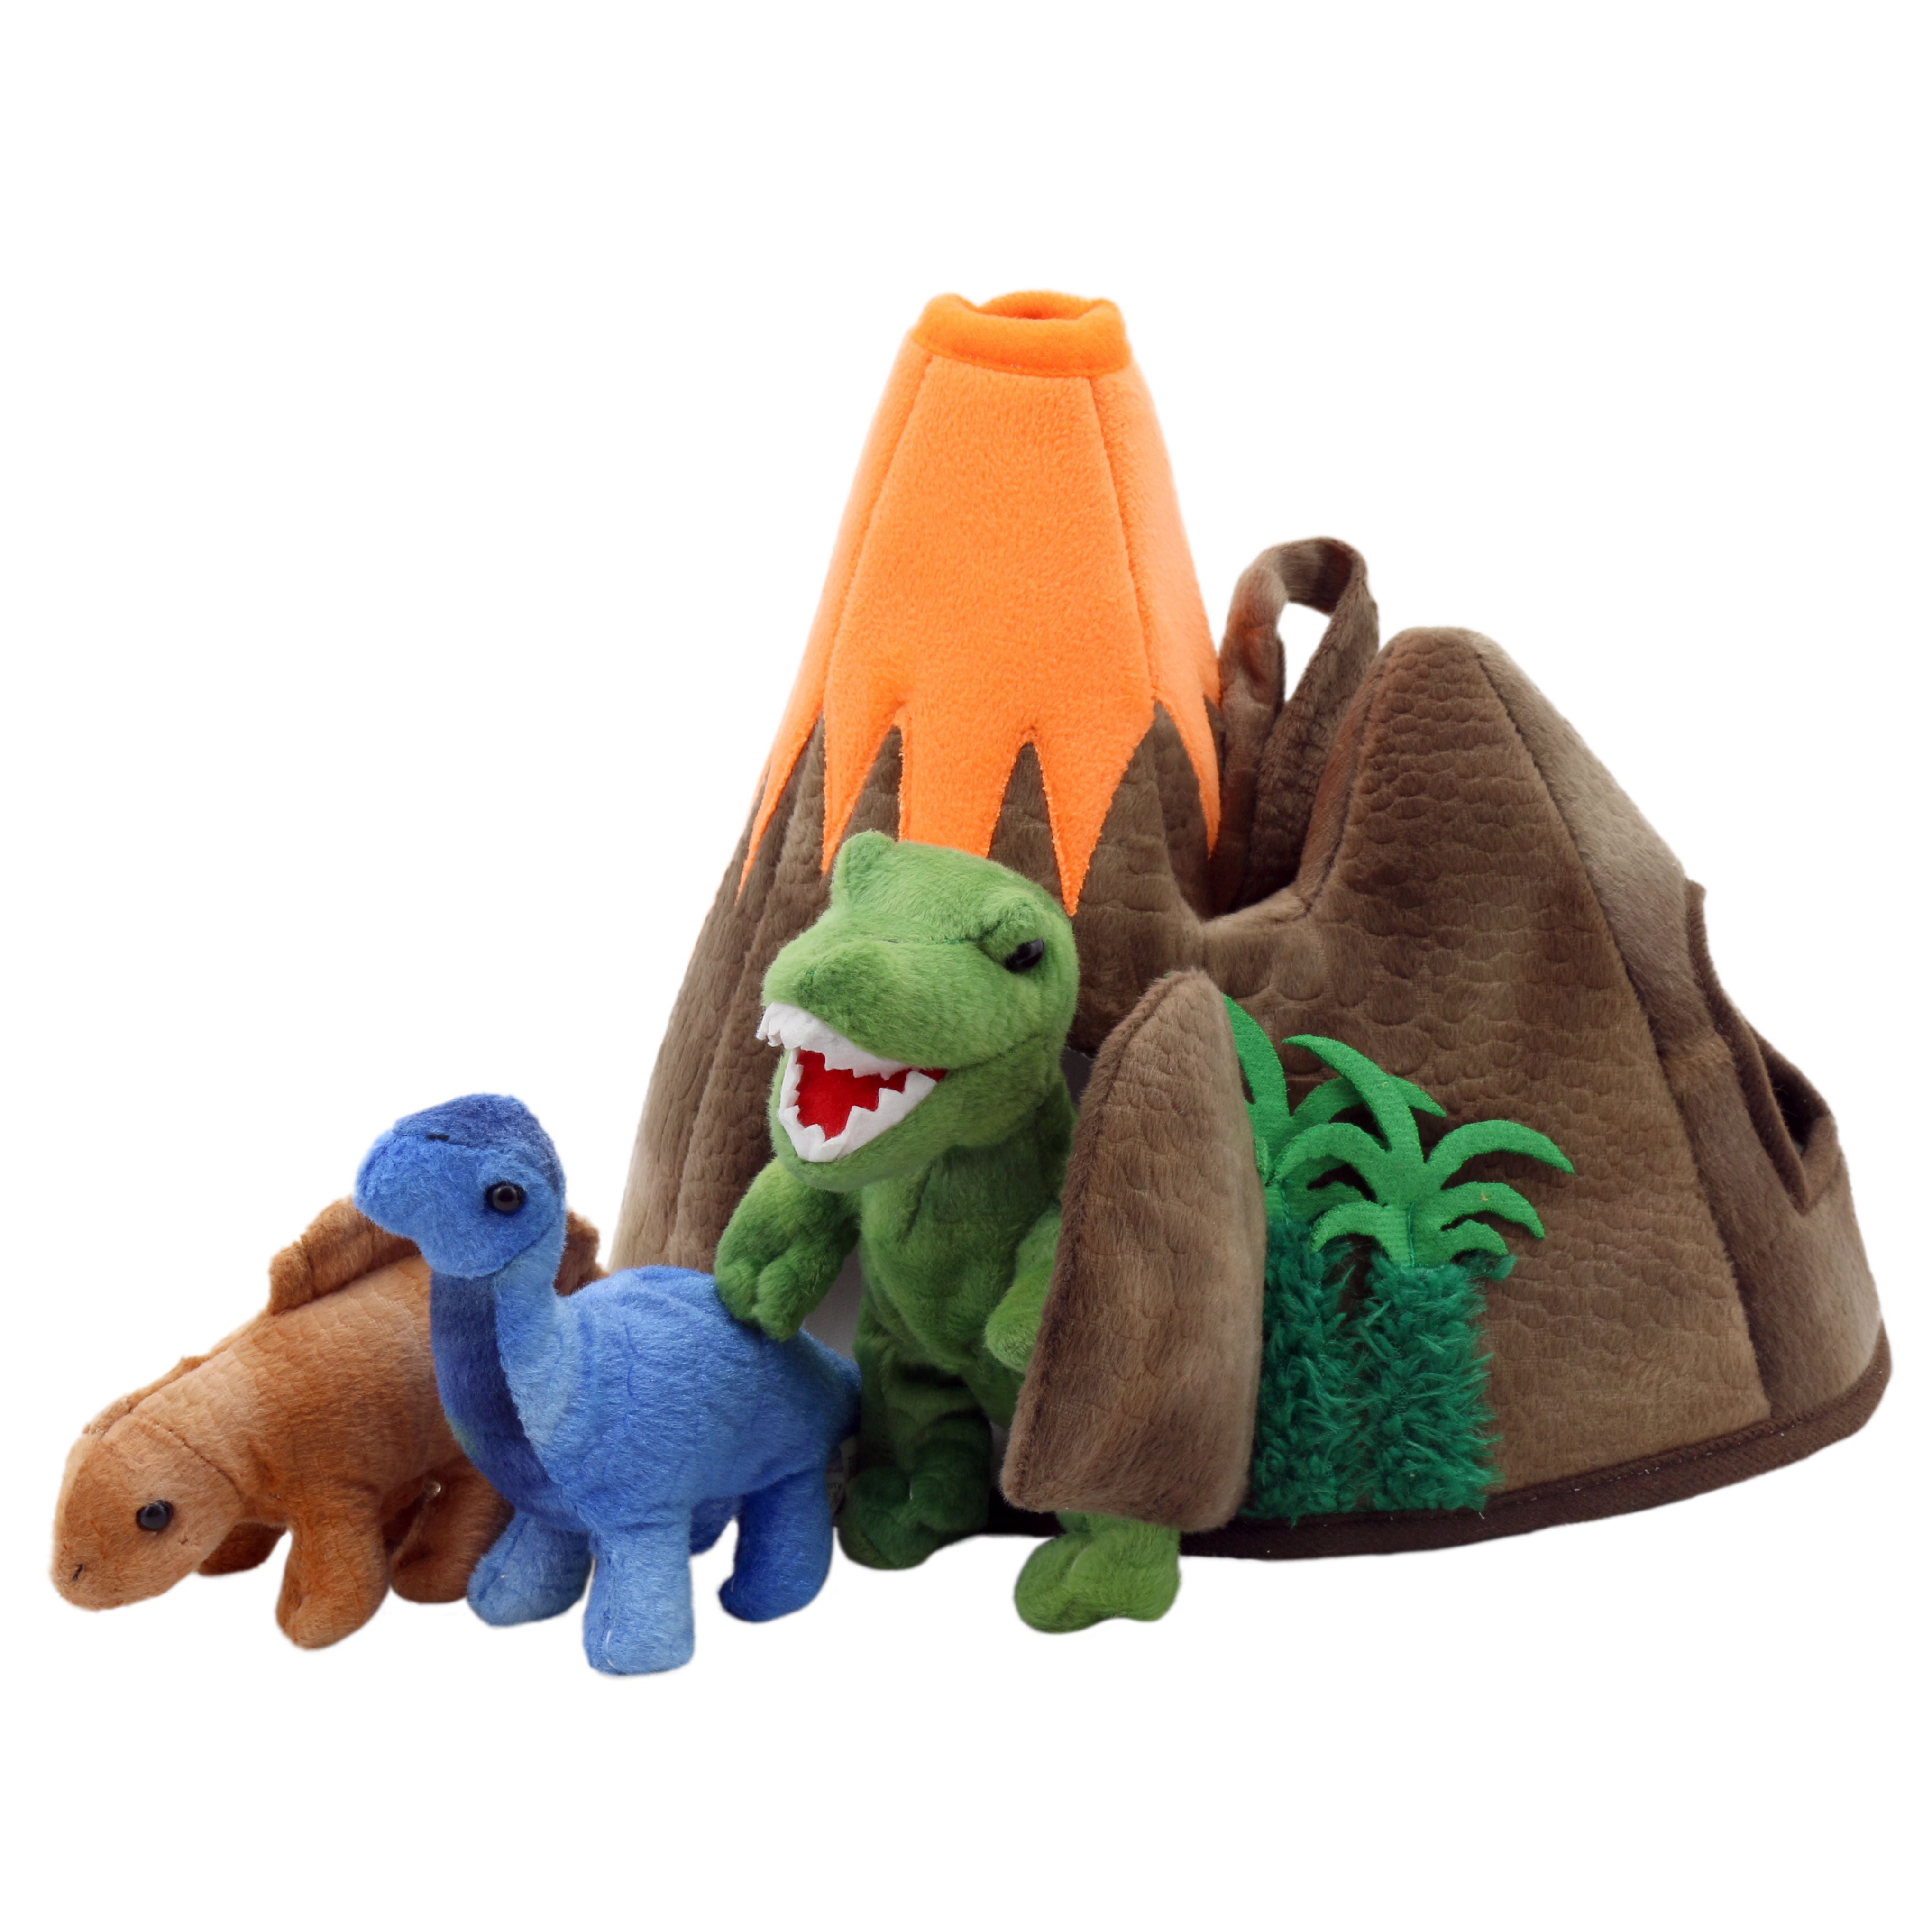 Dinosaur Finger Puppets The Puppet Company LLC Triceratops